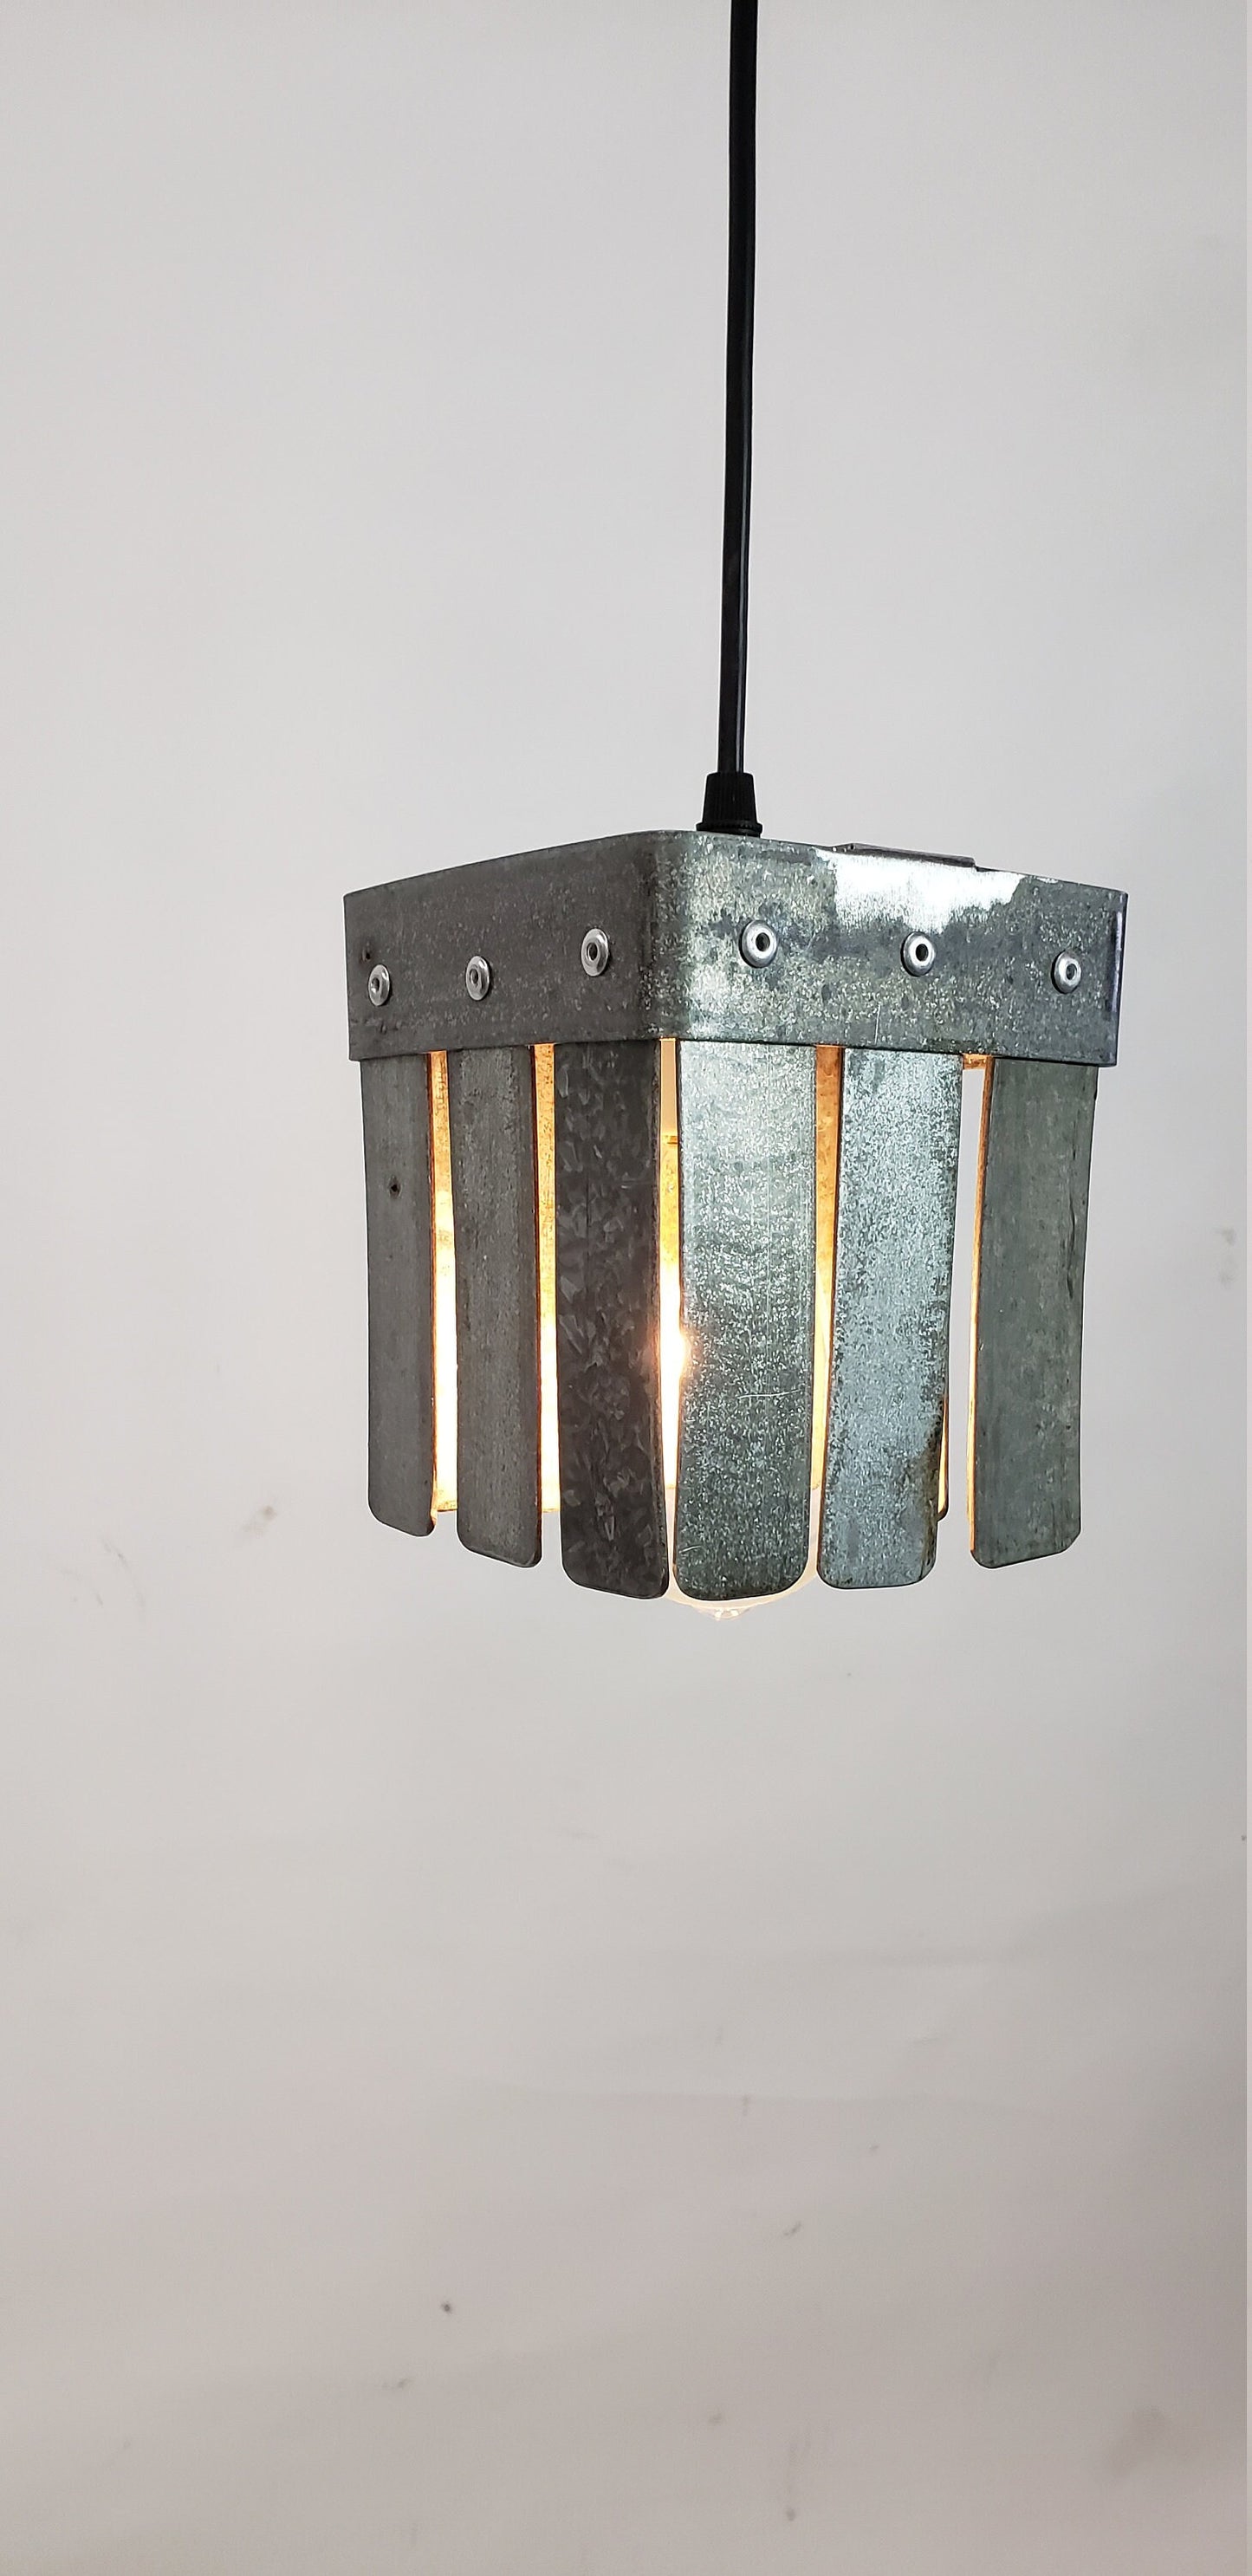 Wine Barrel Pendant Light - Hexahedron - Made from retired California wine barrel rings. 100% Recycled!